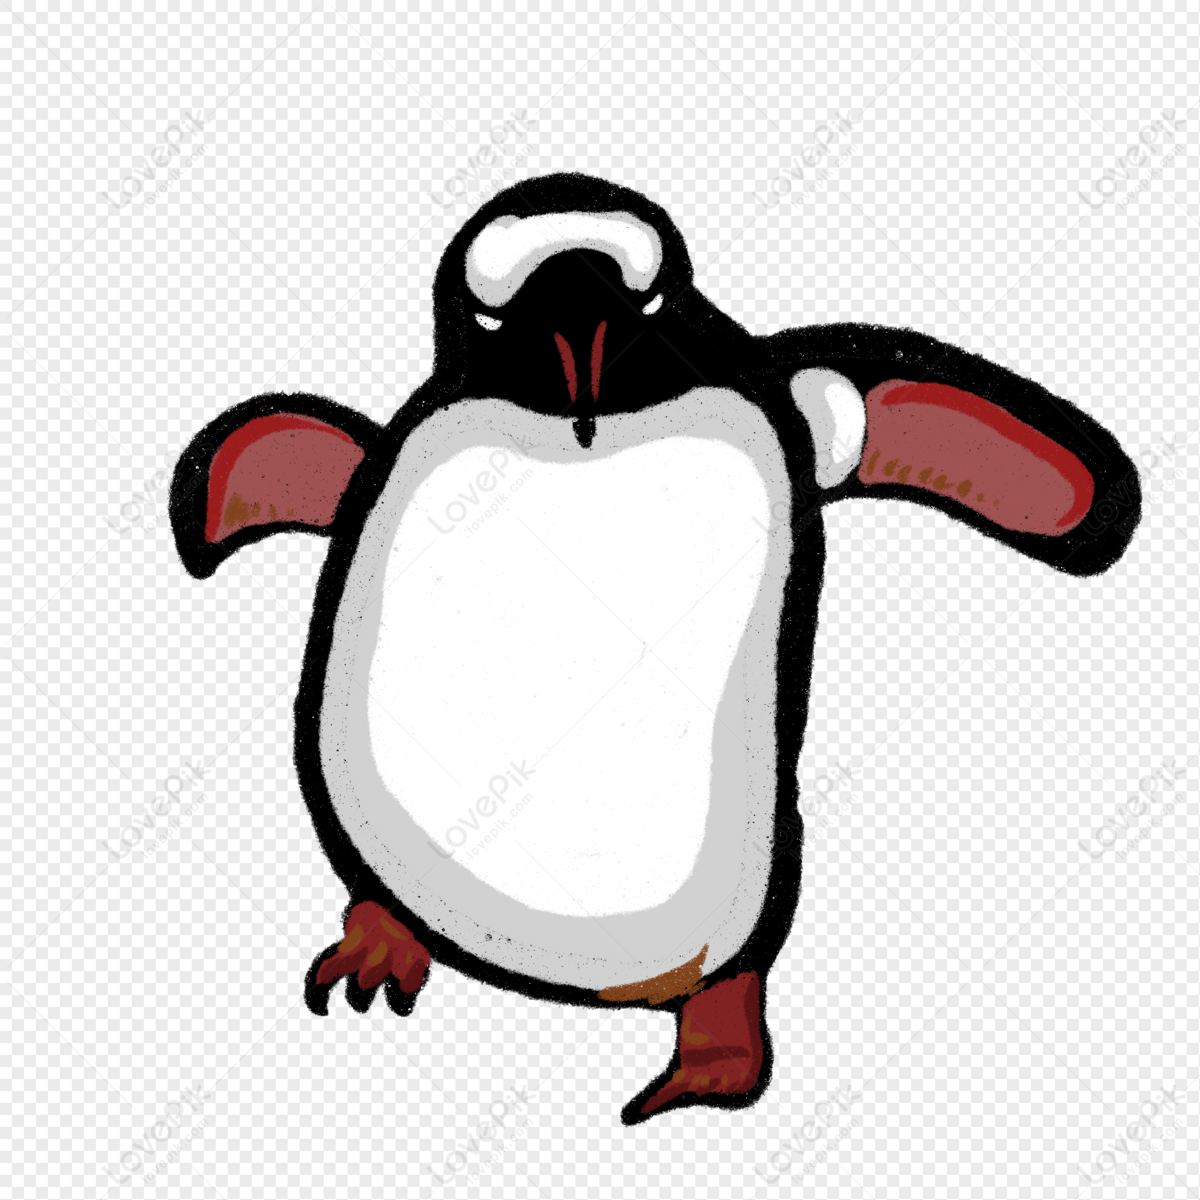 Cartoon Ocean Penguin Illustration PNG Picture And Clipart Image For Free  Download - Lovepik | 401300945